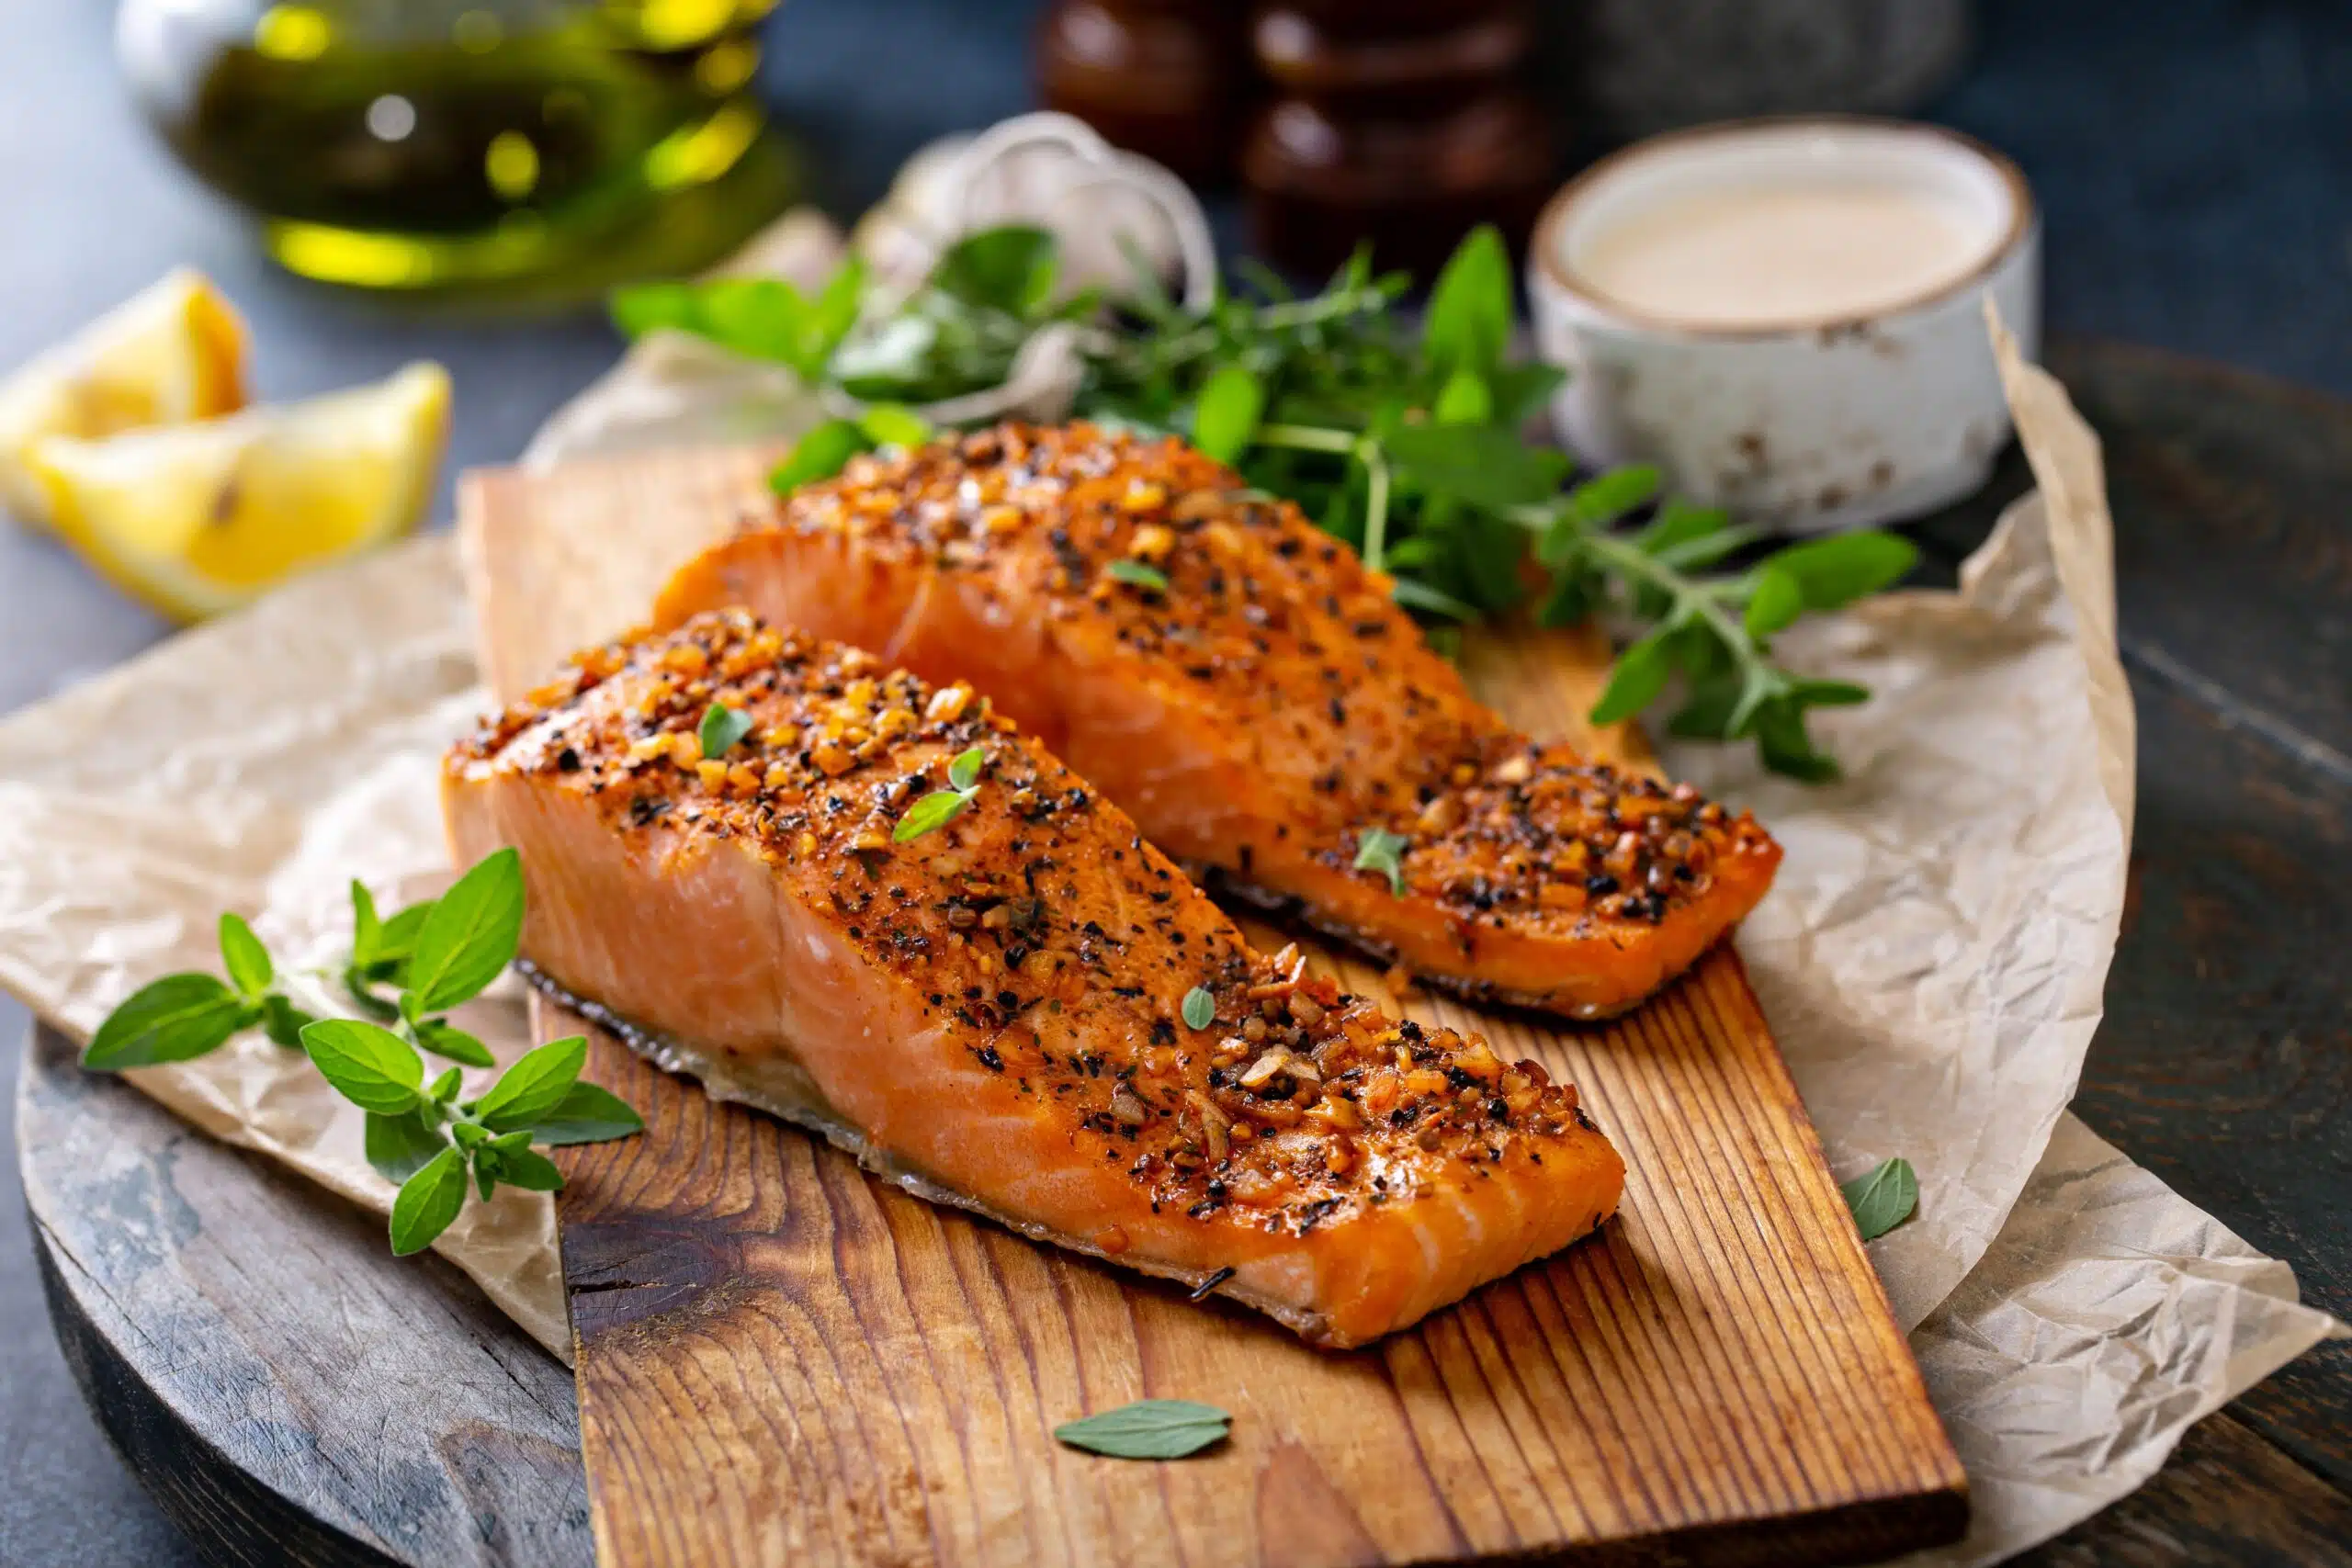 roasted salmon with herbs, garlic and spices